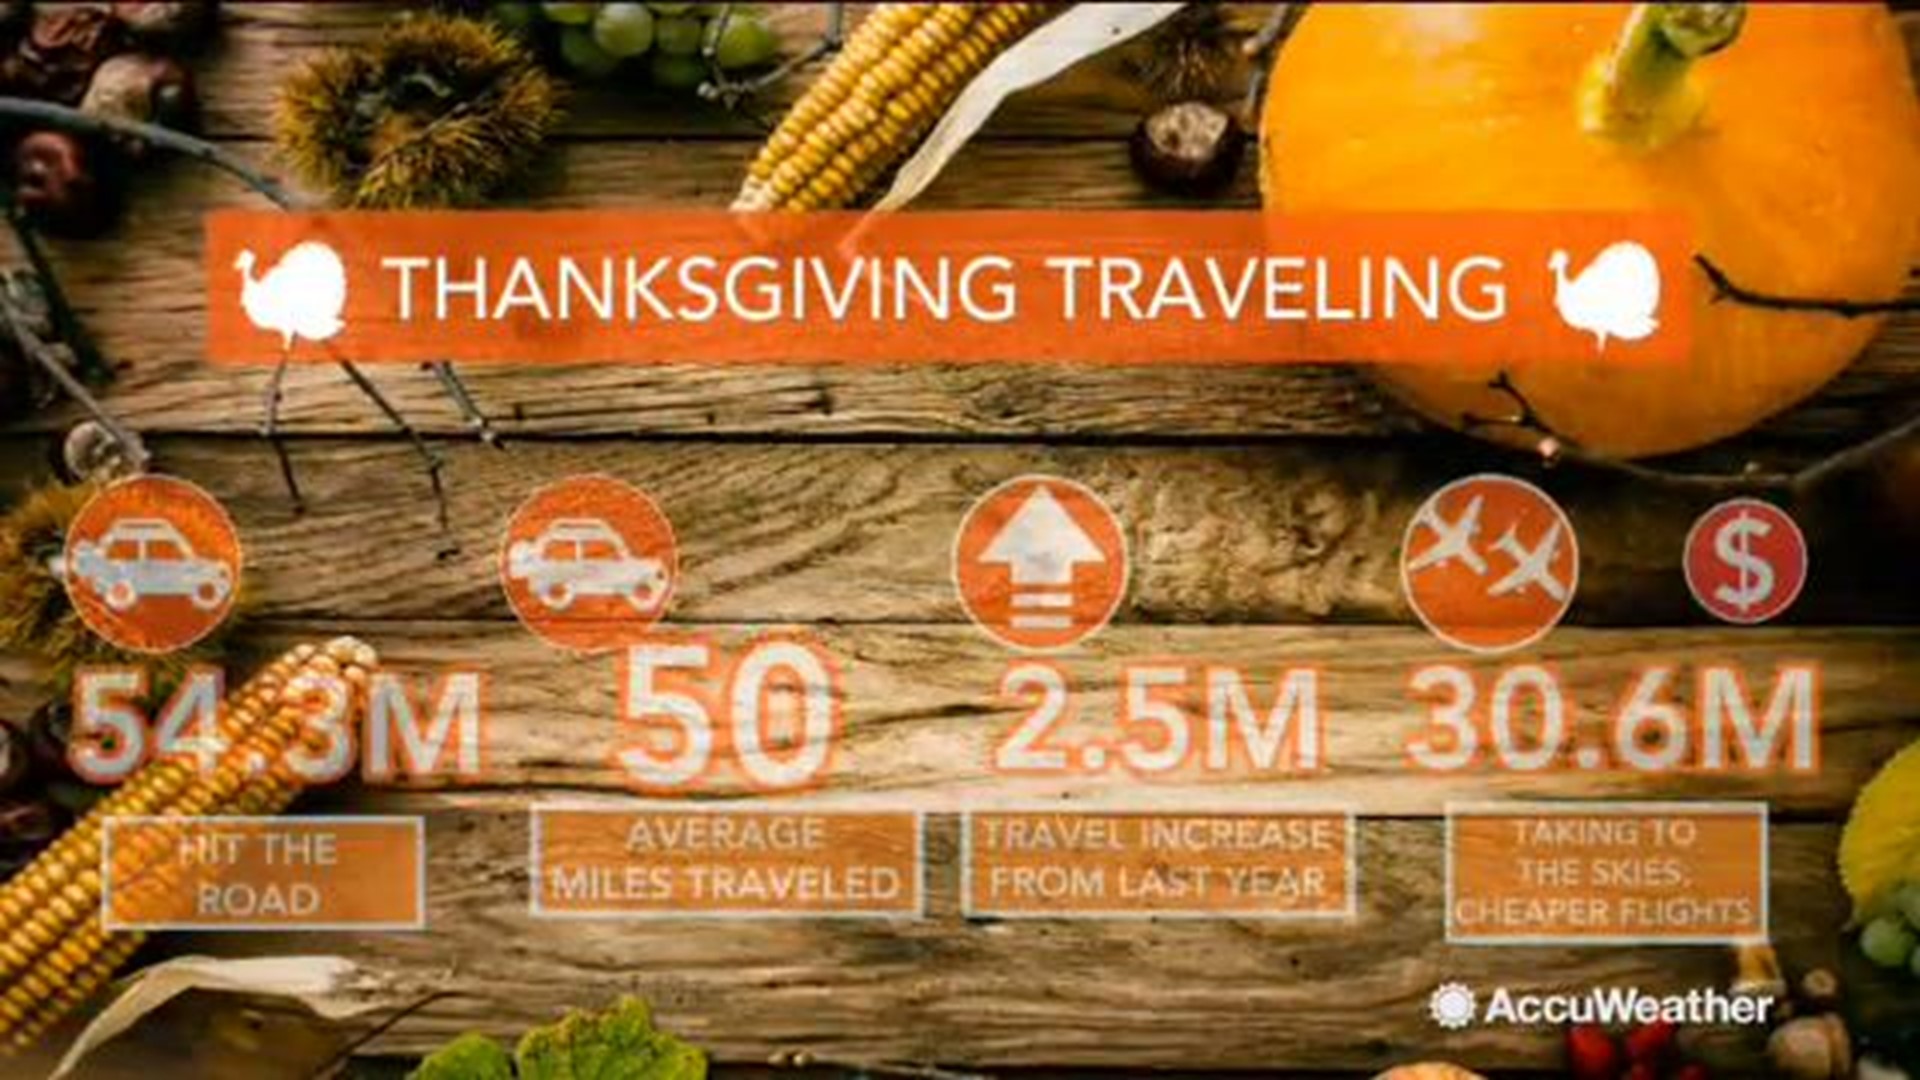 AAA is projecting 54.3 million people will travel at least 50 miles via planes, trains, automobiles and even cruise ships, this year for Thanksgiving. That's the highest number of travelers for the holiday since 2005.